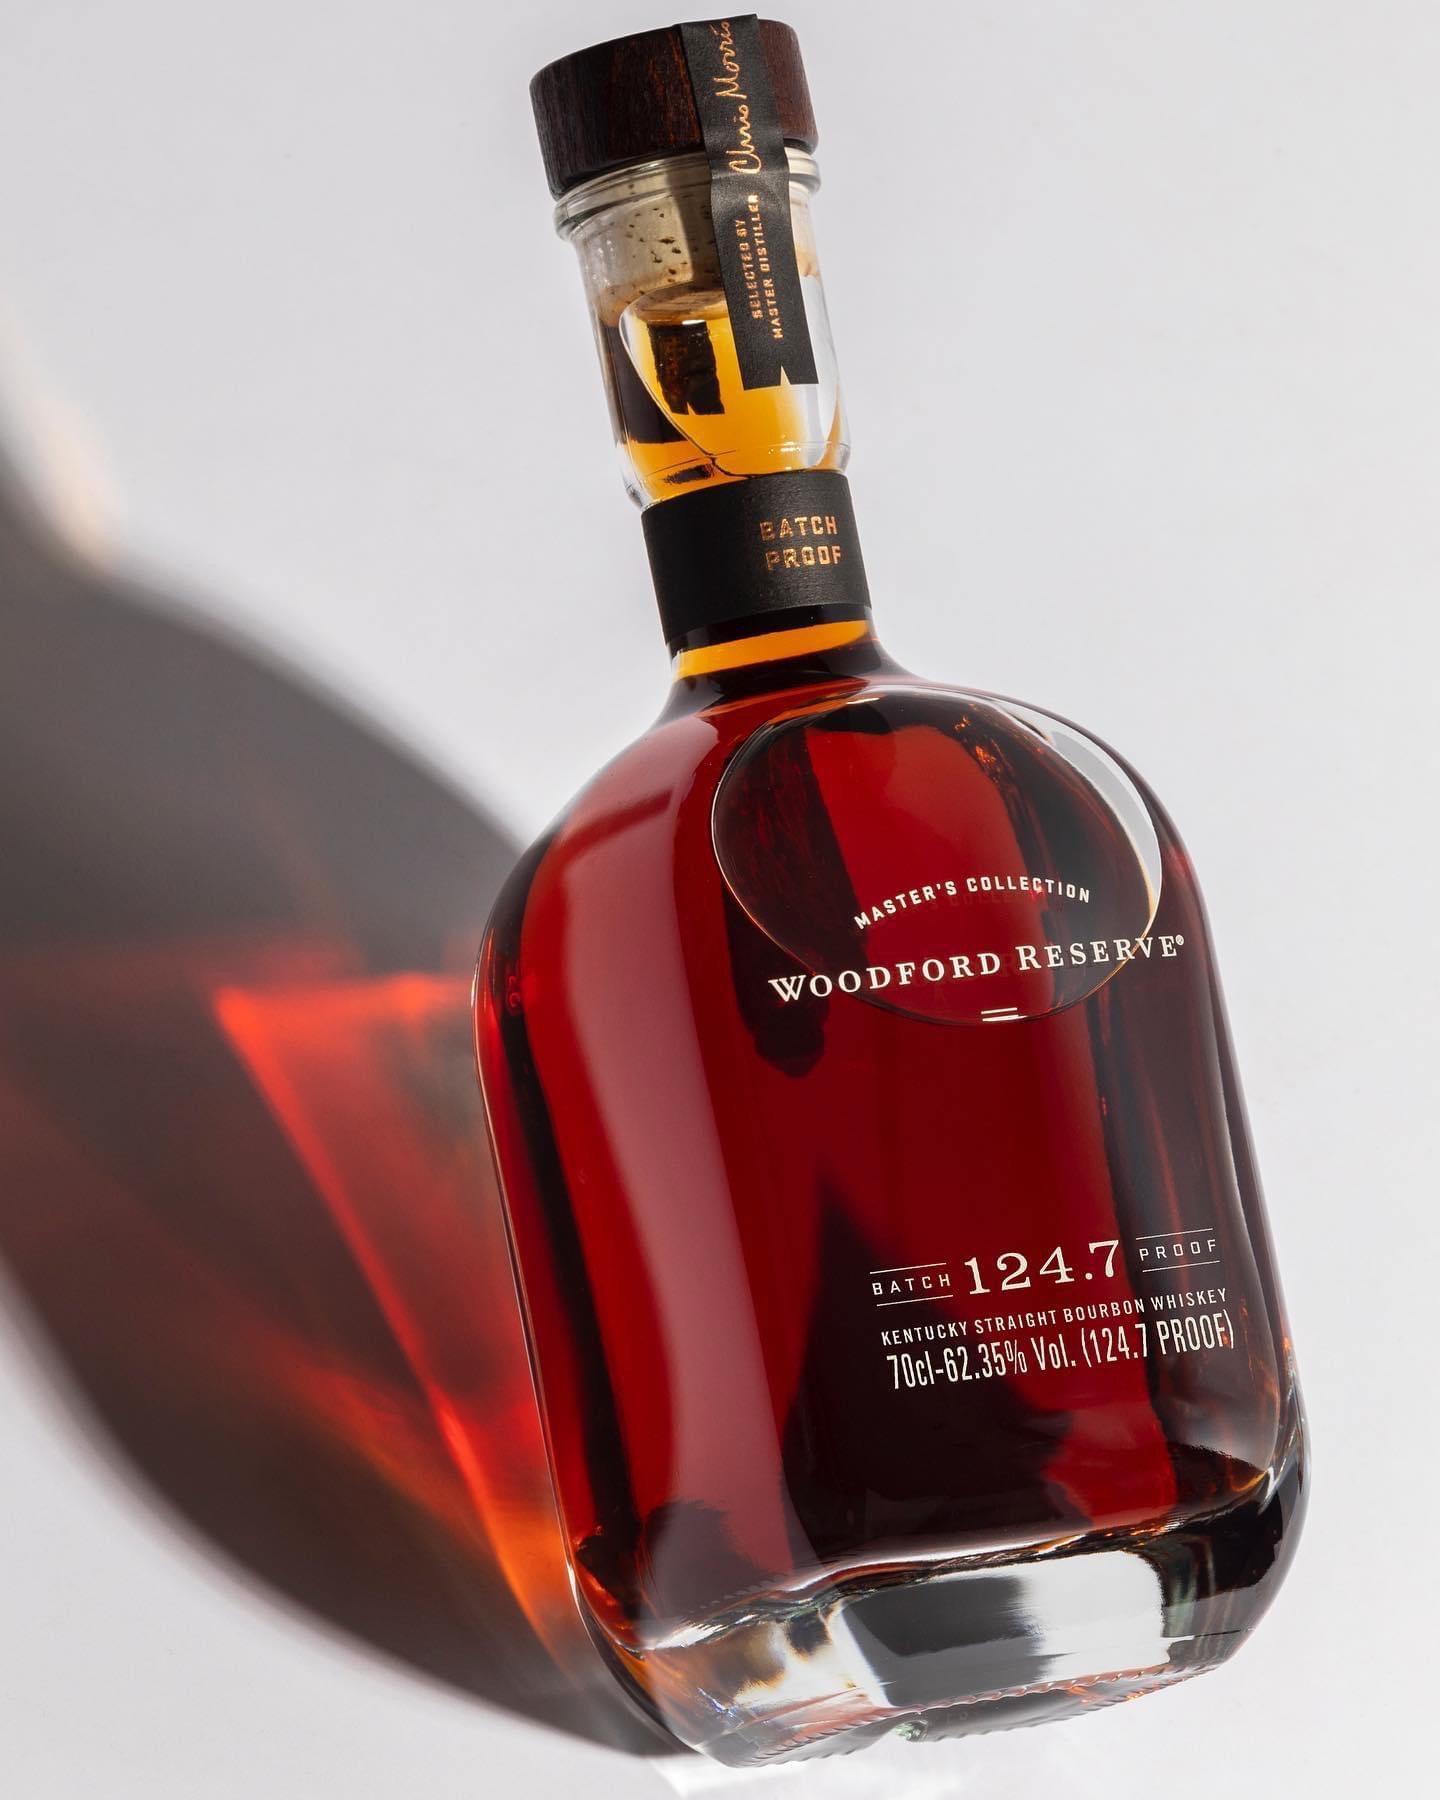 Woodford Reserve Releases its 2023 Limited Edition at 124.7 Proof